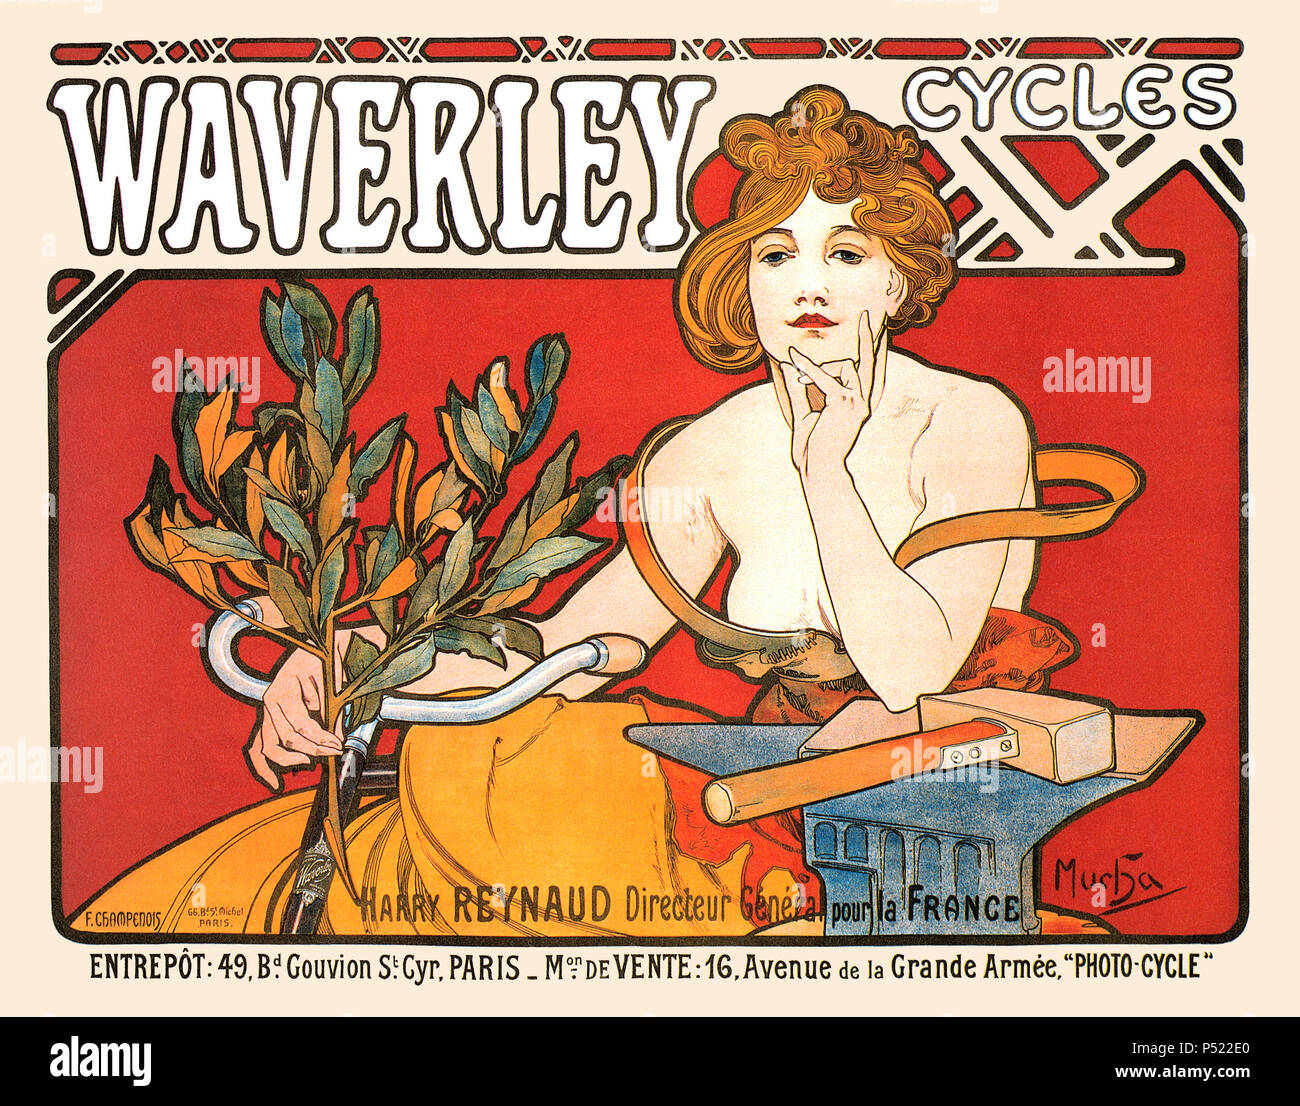 1898 advertising poster by Alphonse Mucha for Waverley Cycles of Indianapolis. Stock Photo